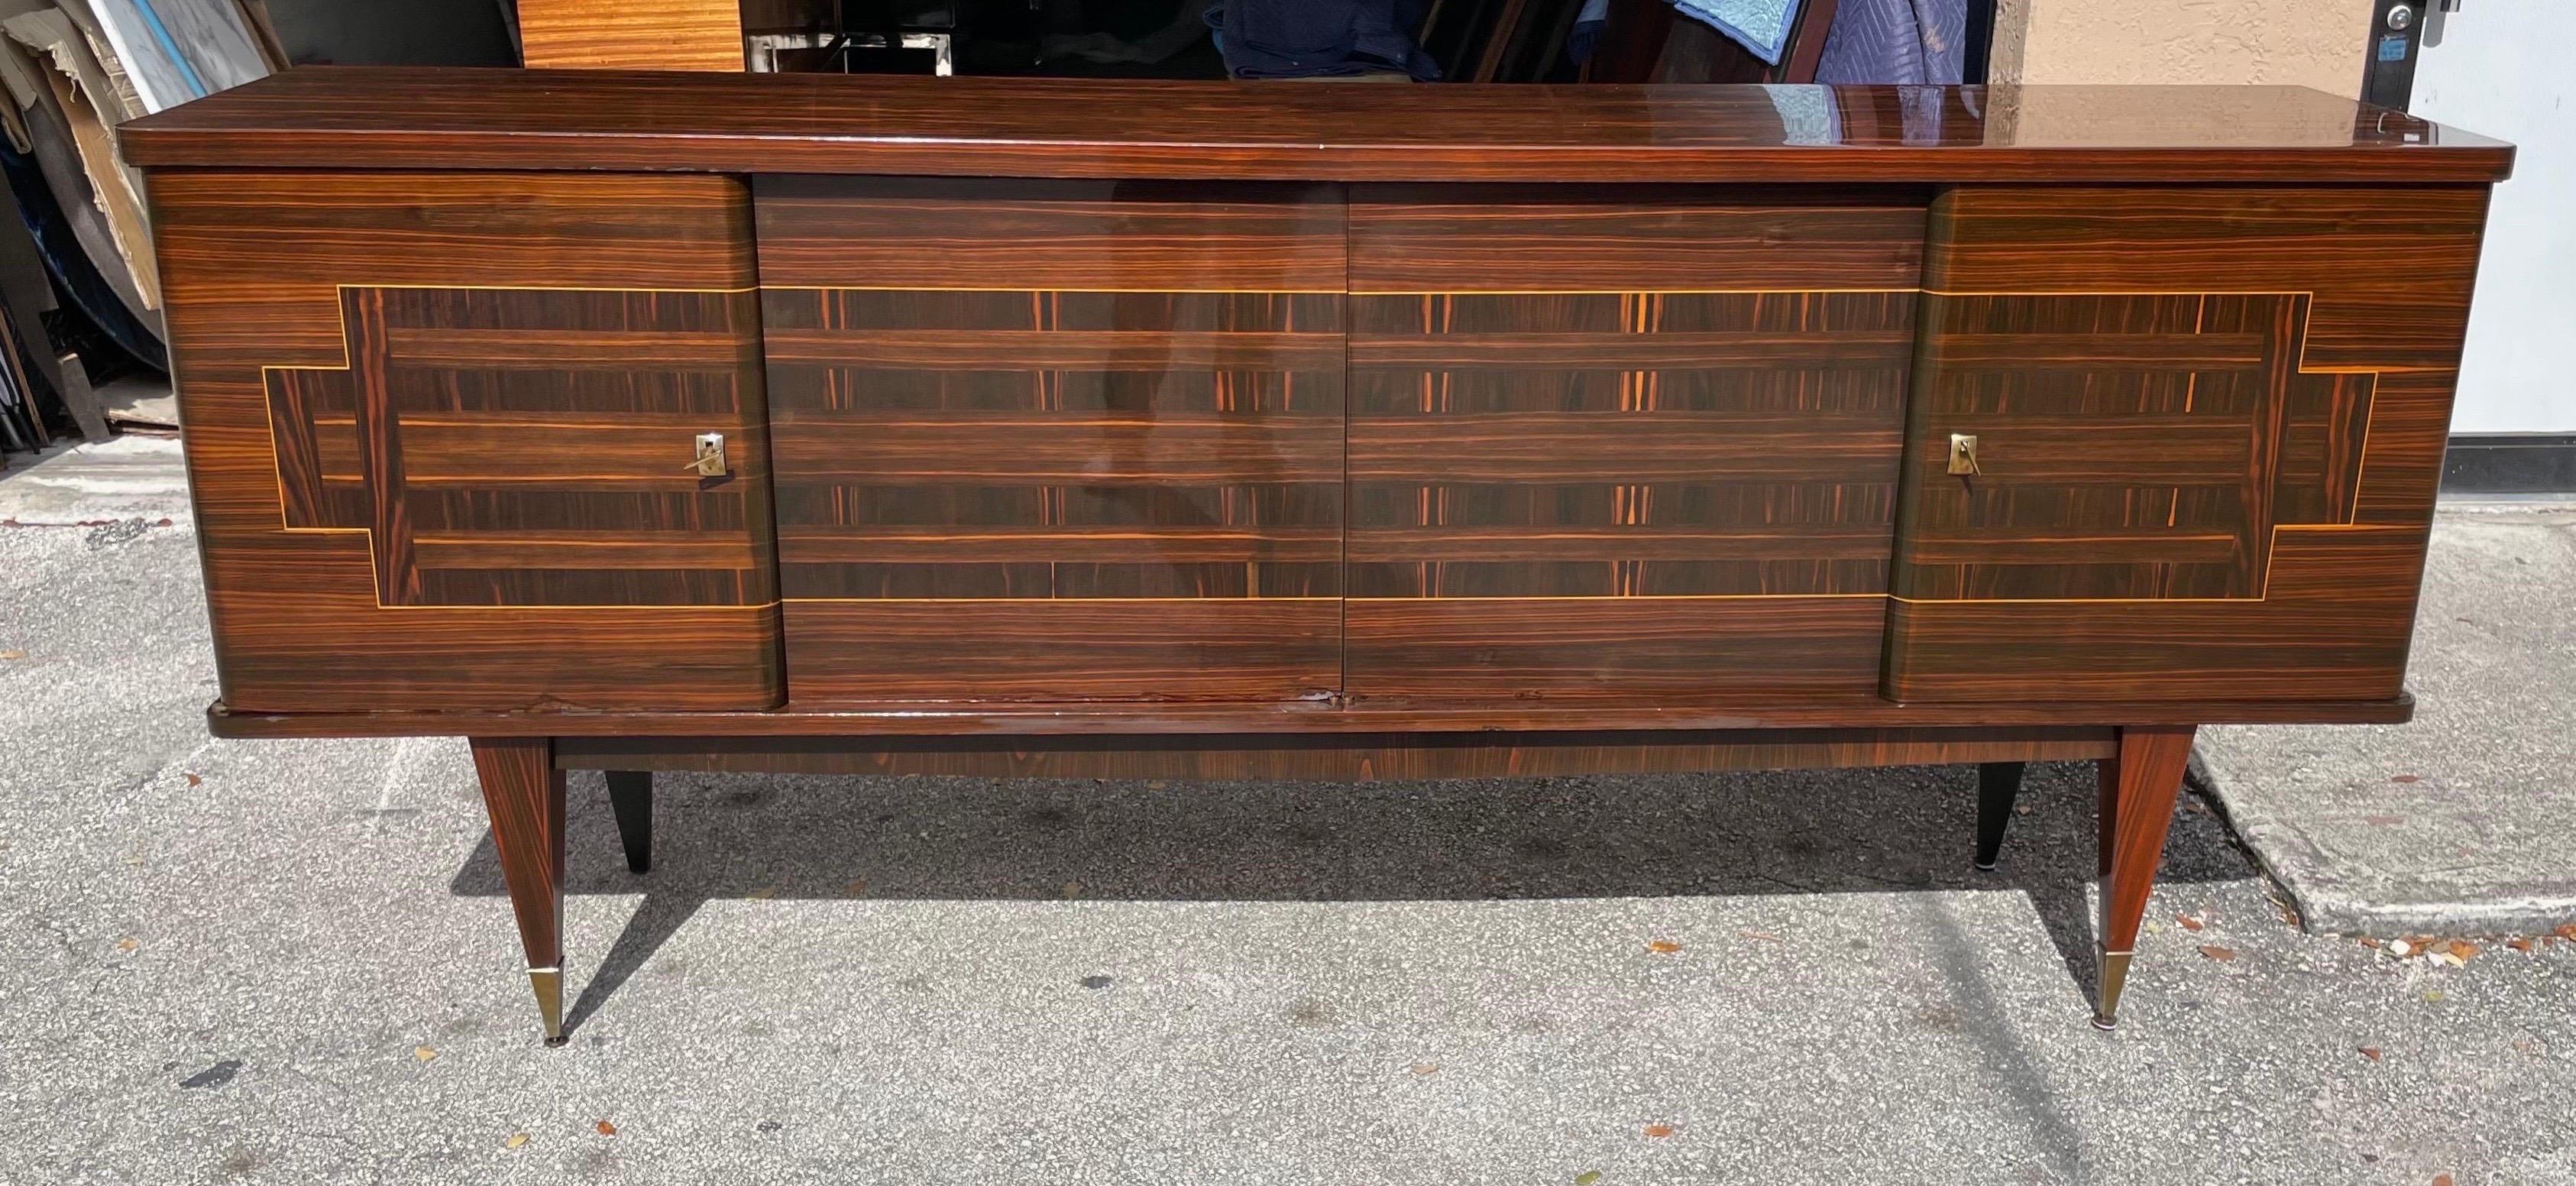 Incredible French Art Deco 4 door exotic Macassar ebony credenza or sideboard. The sideboard opens to reveal removable shelves and a bar.